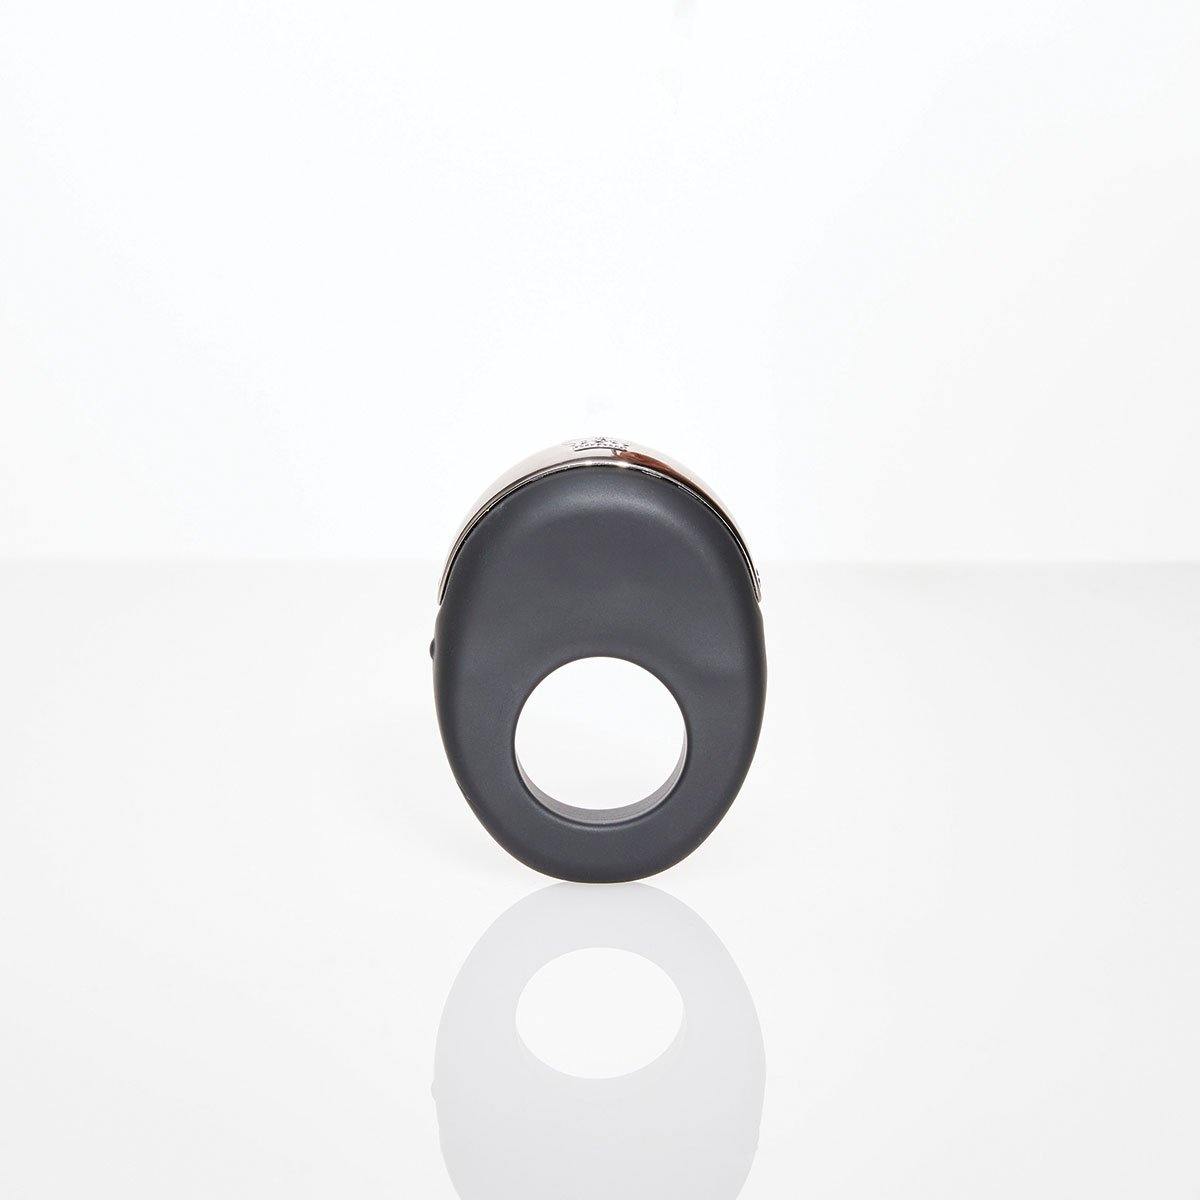 Hot Octopuss Atom C-Ring - Buy At Luxury Toy X - Free 3-Day Shipping